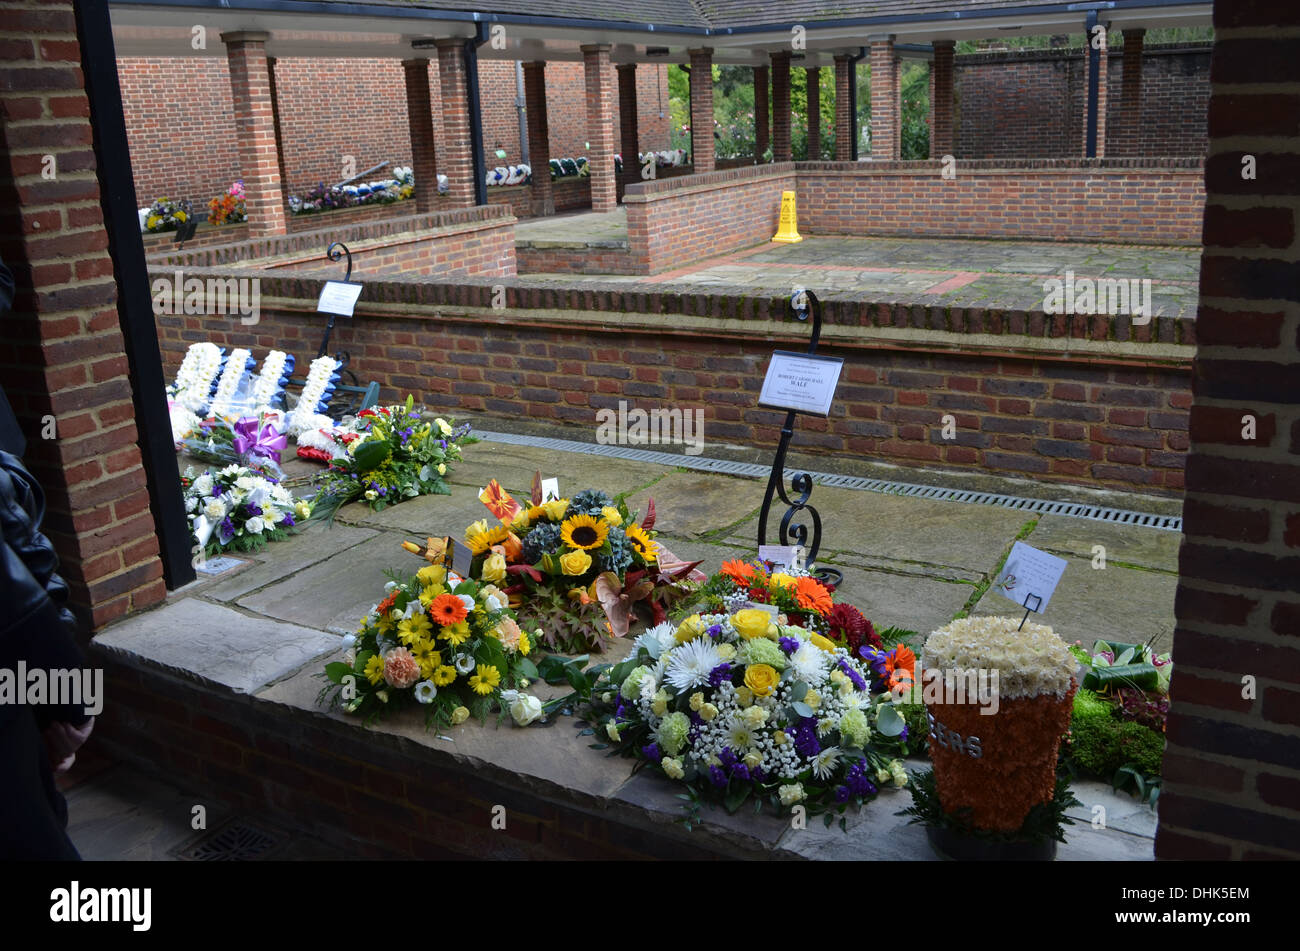 Page 3 - Crematorium High Resolution Stock Photography and Images - Alamy